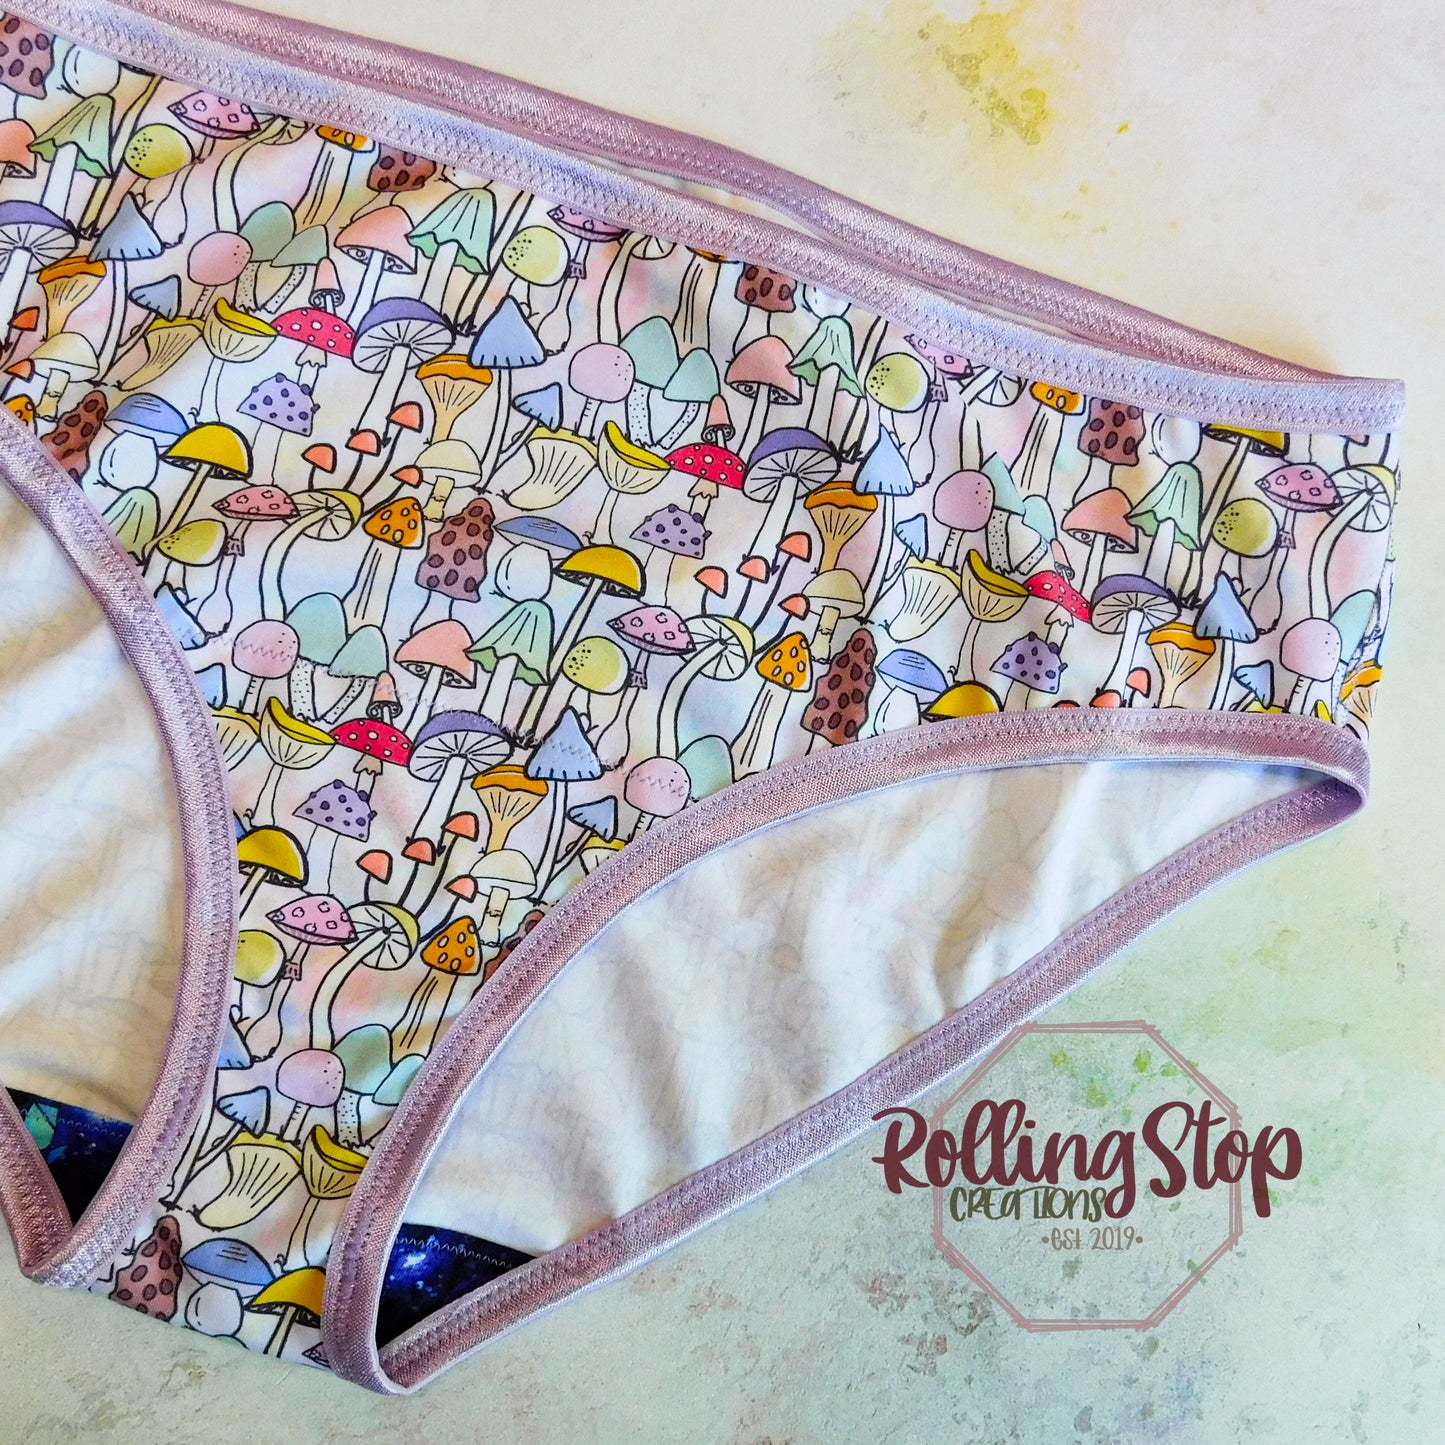 Pastel Mushies Comfy Bra by Rolling Stop Creations sold by Rolling Stop Creations Accessories - Comfy Bra - Comfy Cloth